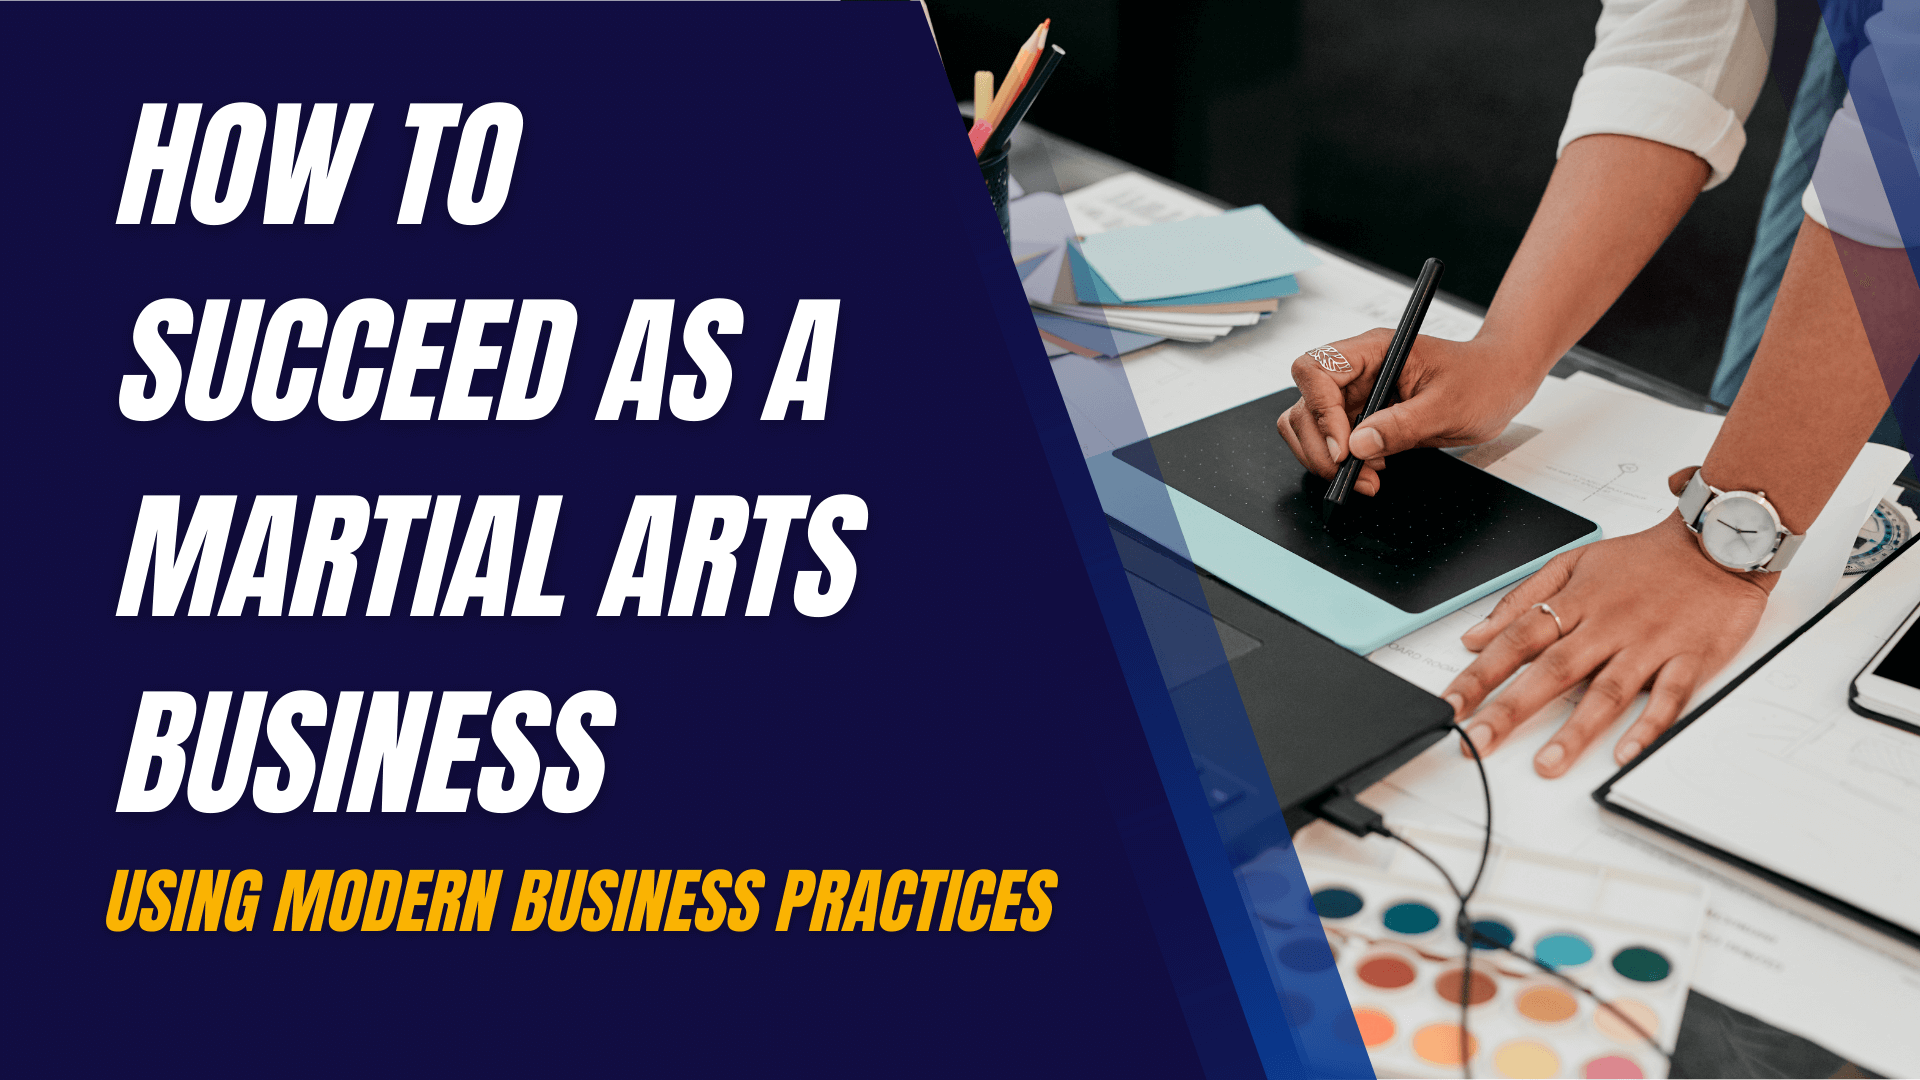 How to Succeed as a Martial Arts Business Using Modern Business Practices